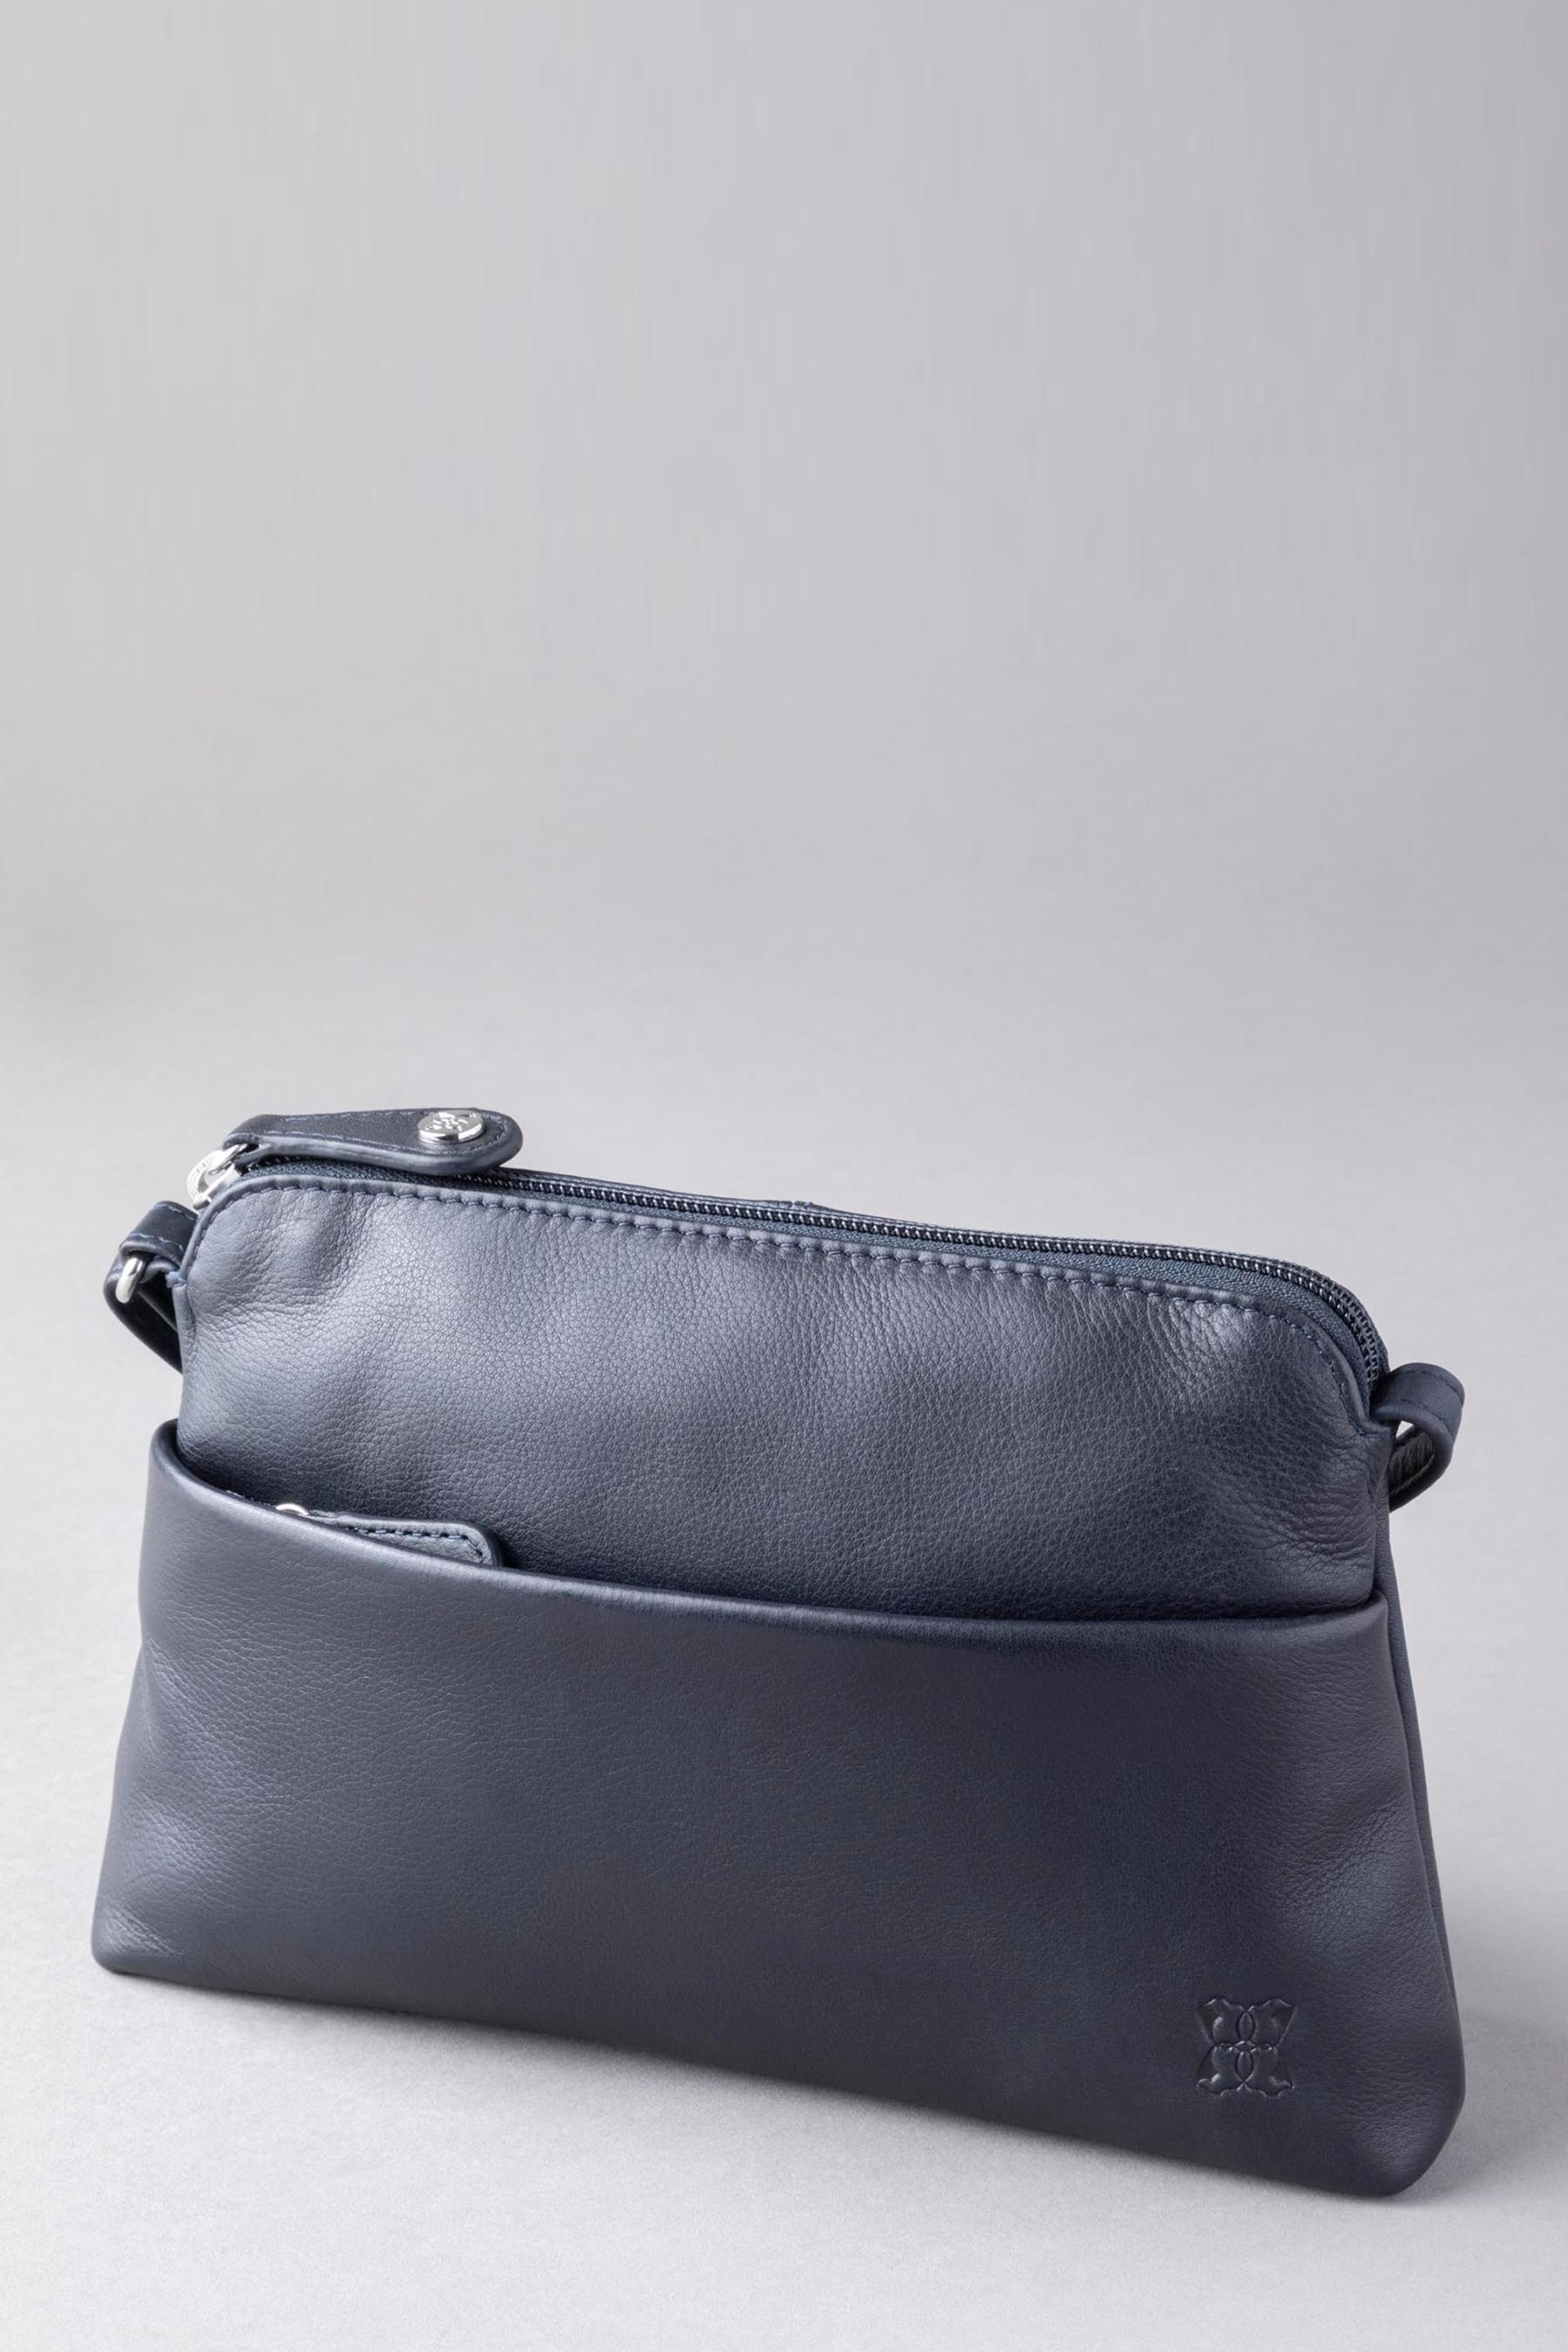 Lakeland Leather Blue Small Rydal Leather Cross-Body Bag - Image 2 of 4